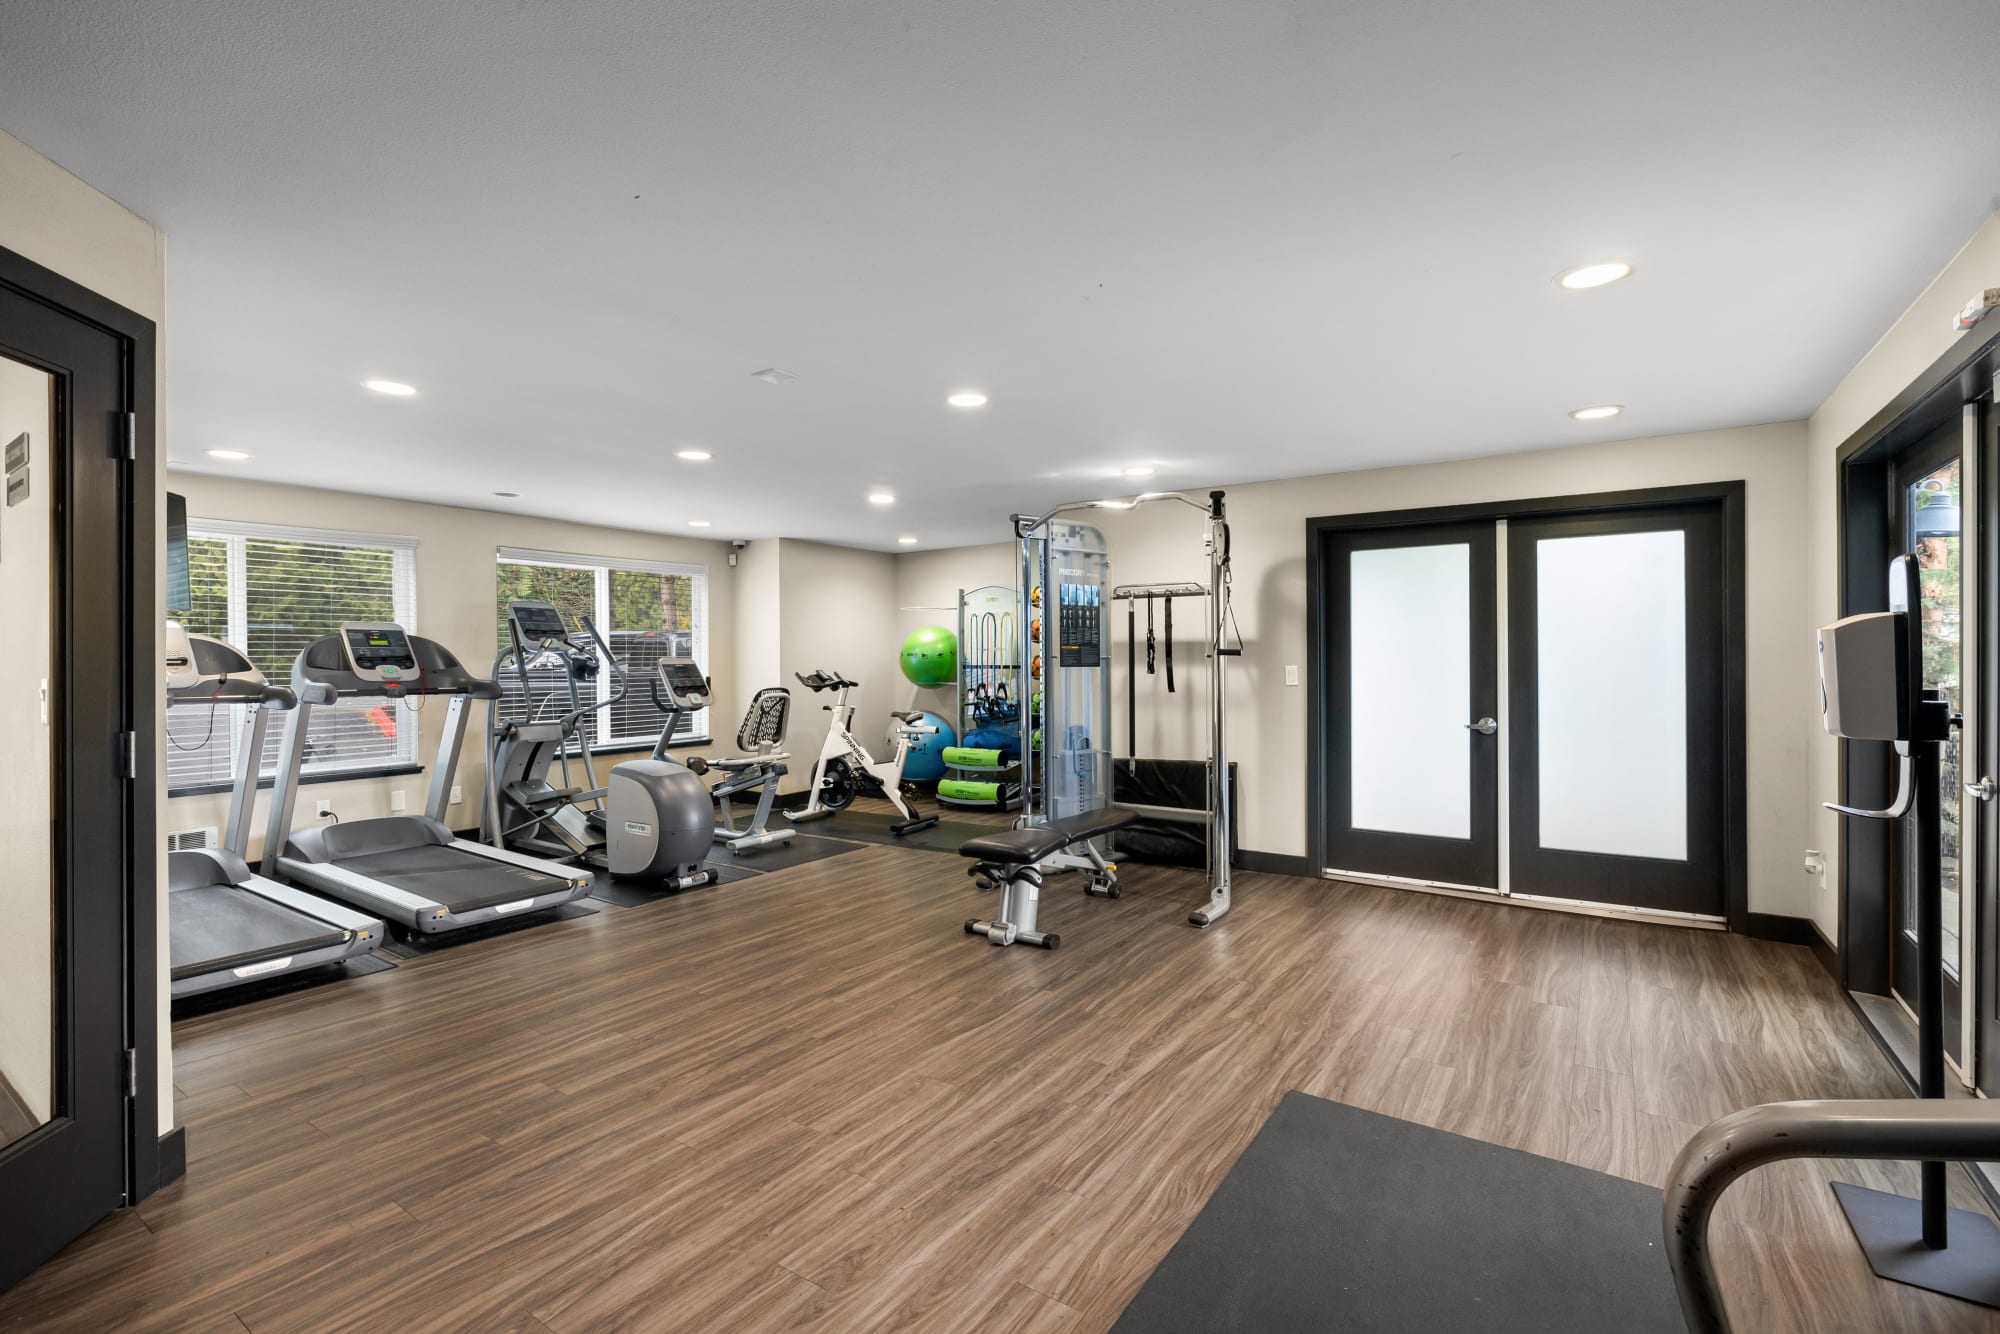 Newly renovated fitness center with free weights at Karbon Apartments in Newcastle, Washington